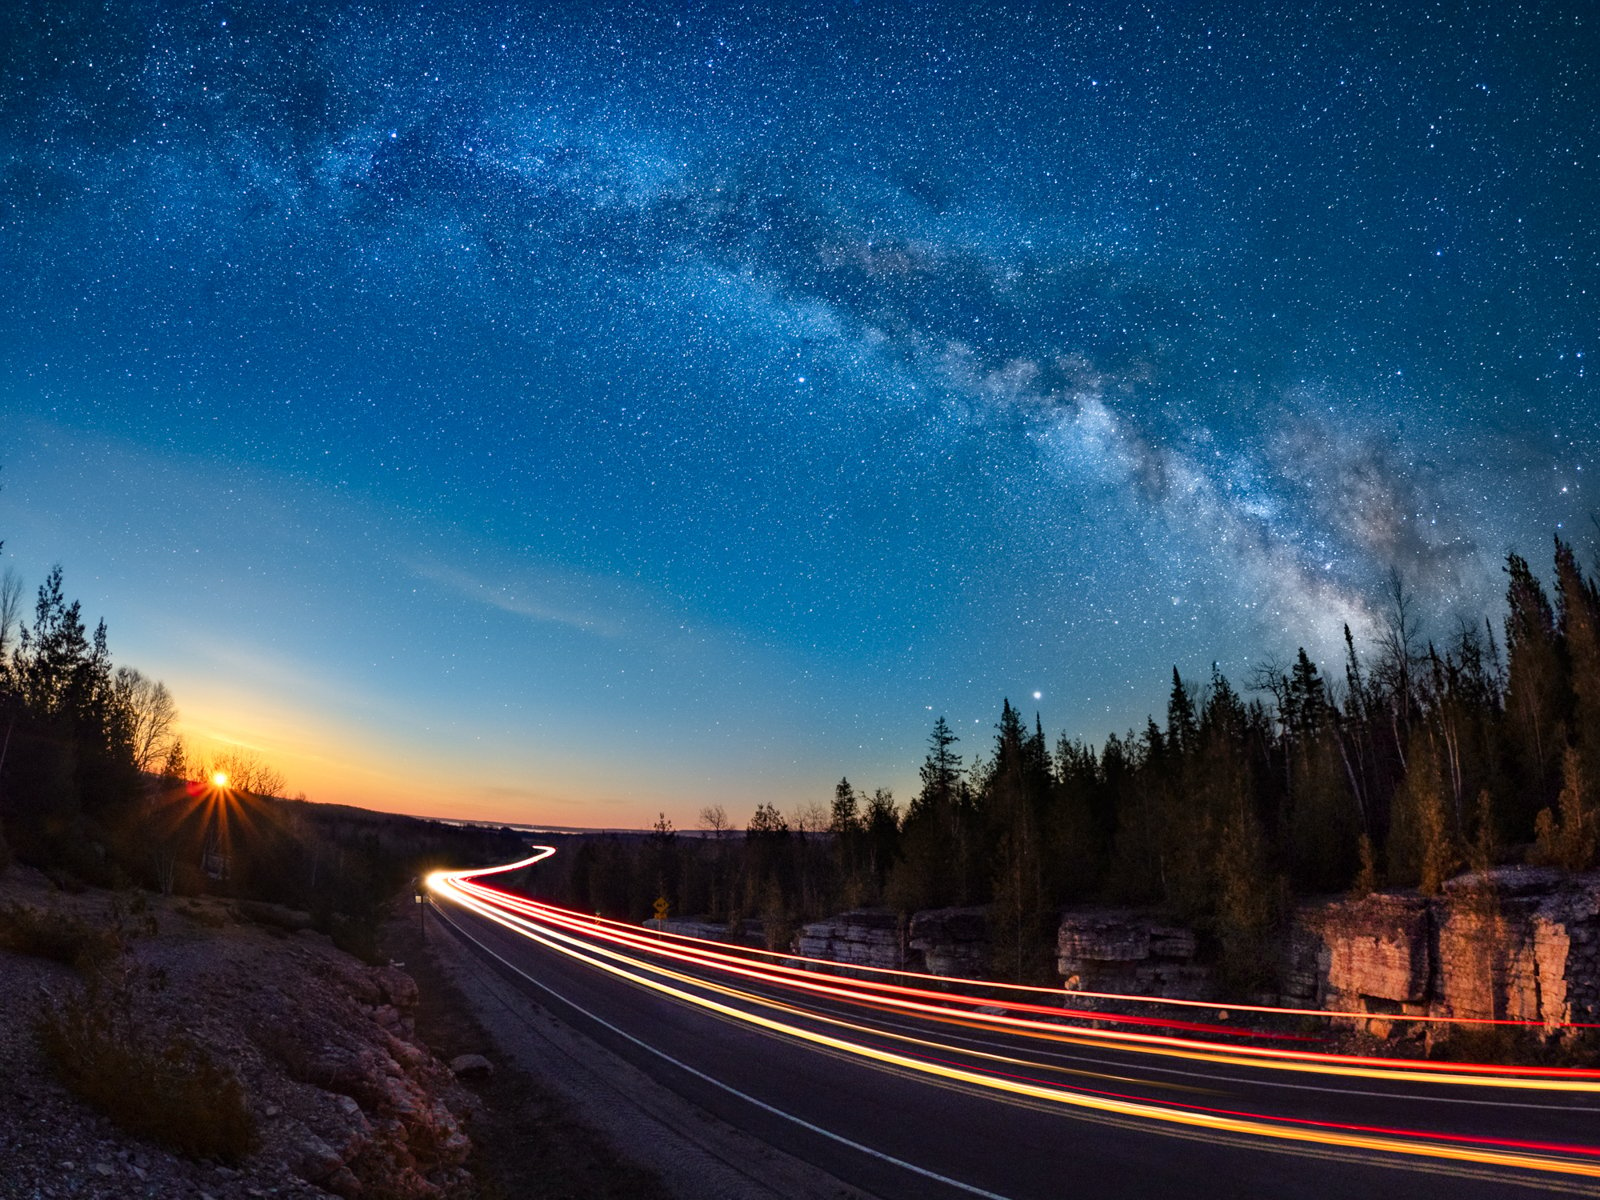 A Complete Guide to Capturing Gorgeous Photos of the Night Sky | PetaPixel